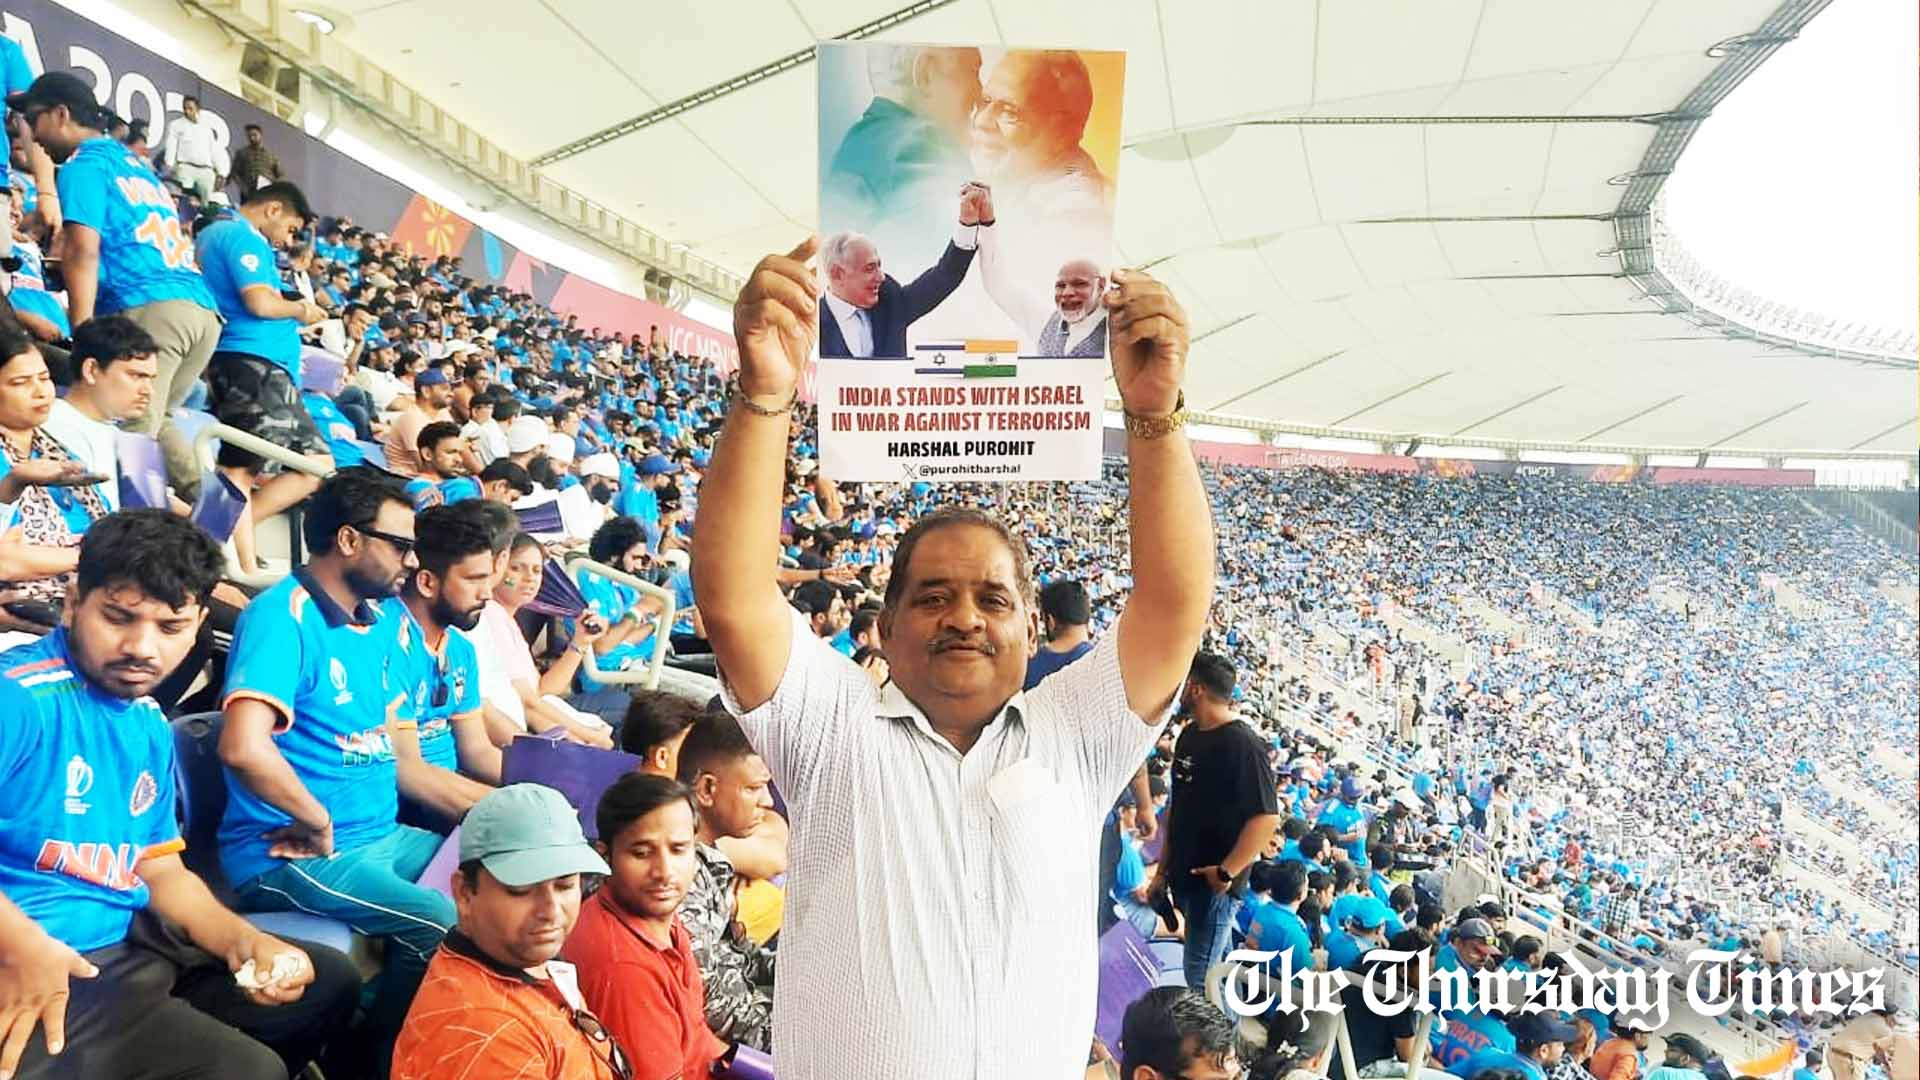 A file photo is shown of an Indian cricket fan with a pro-Israel poster. — X/@ISRAEL